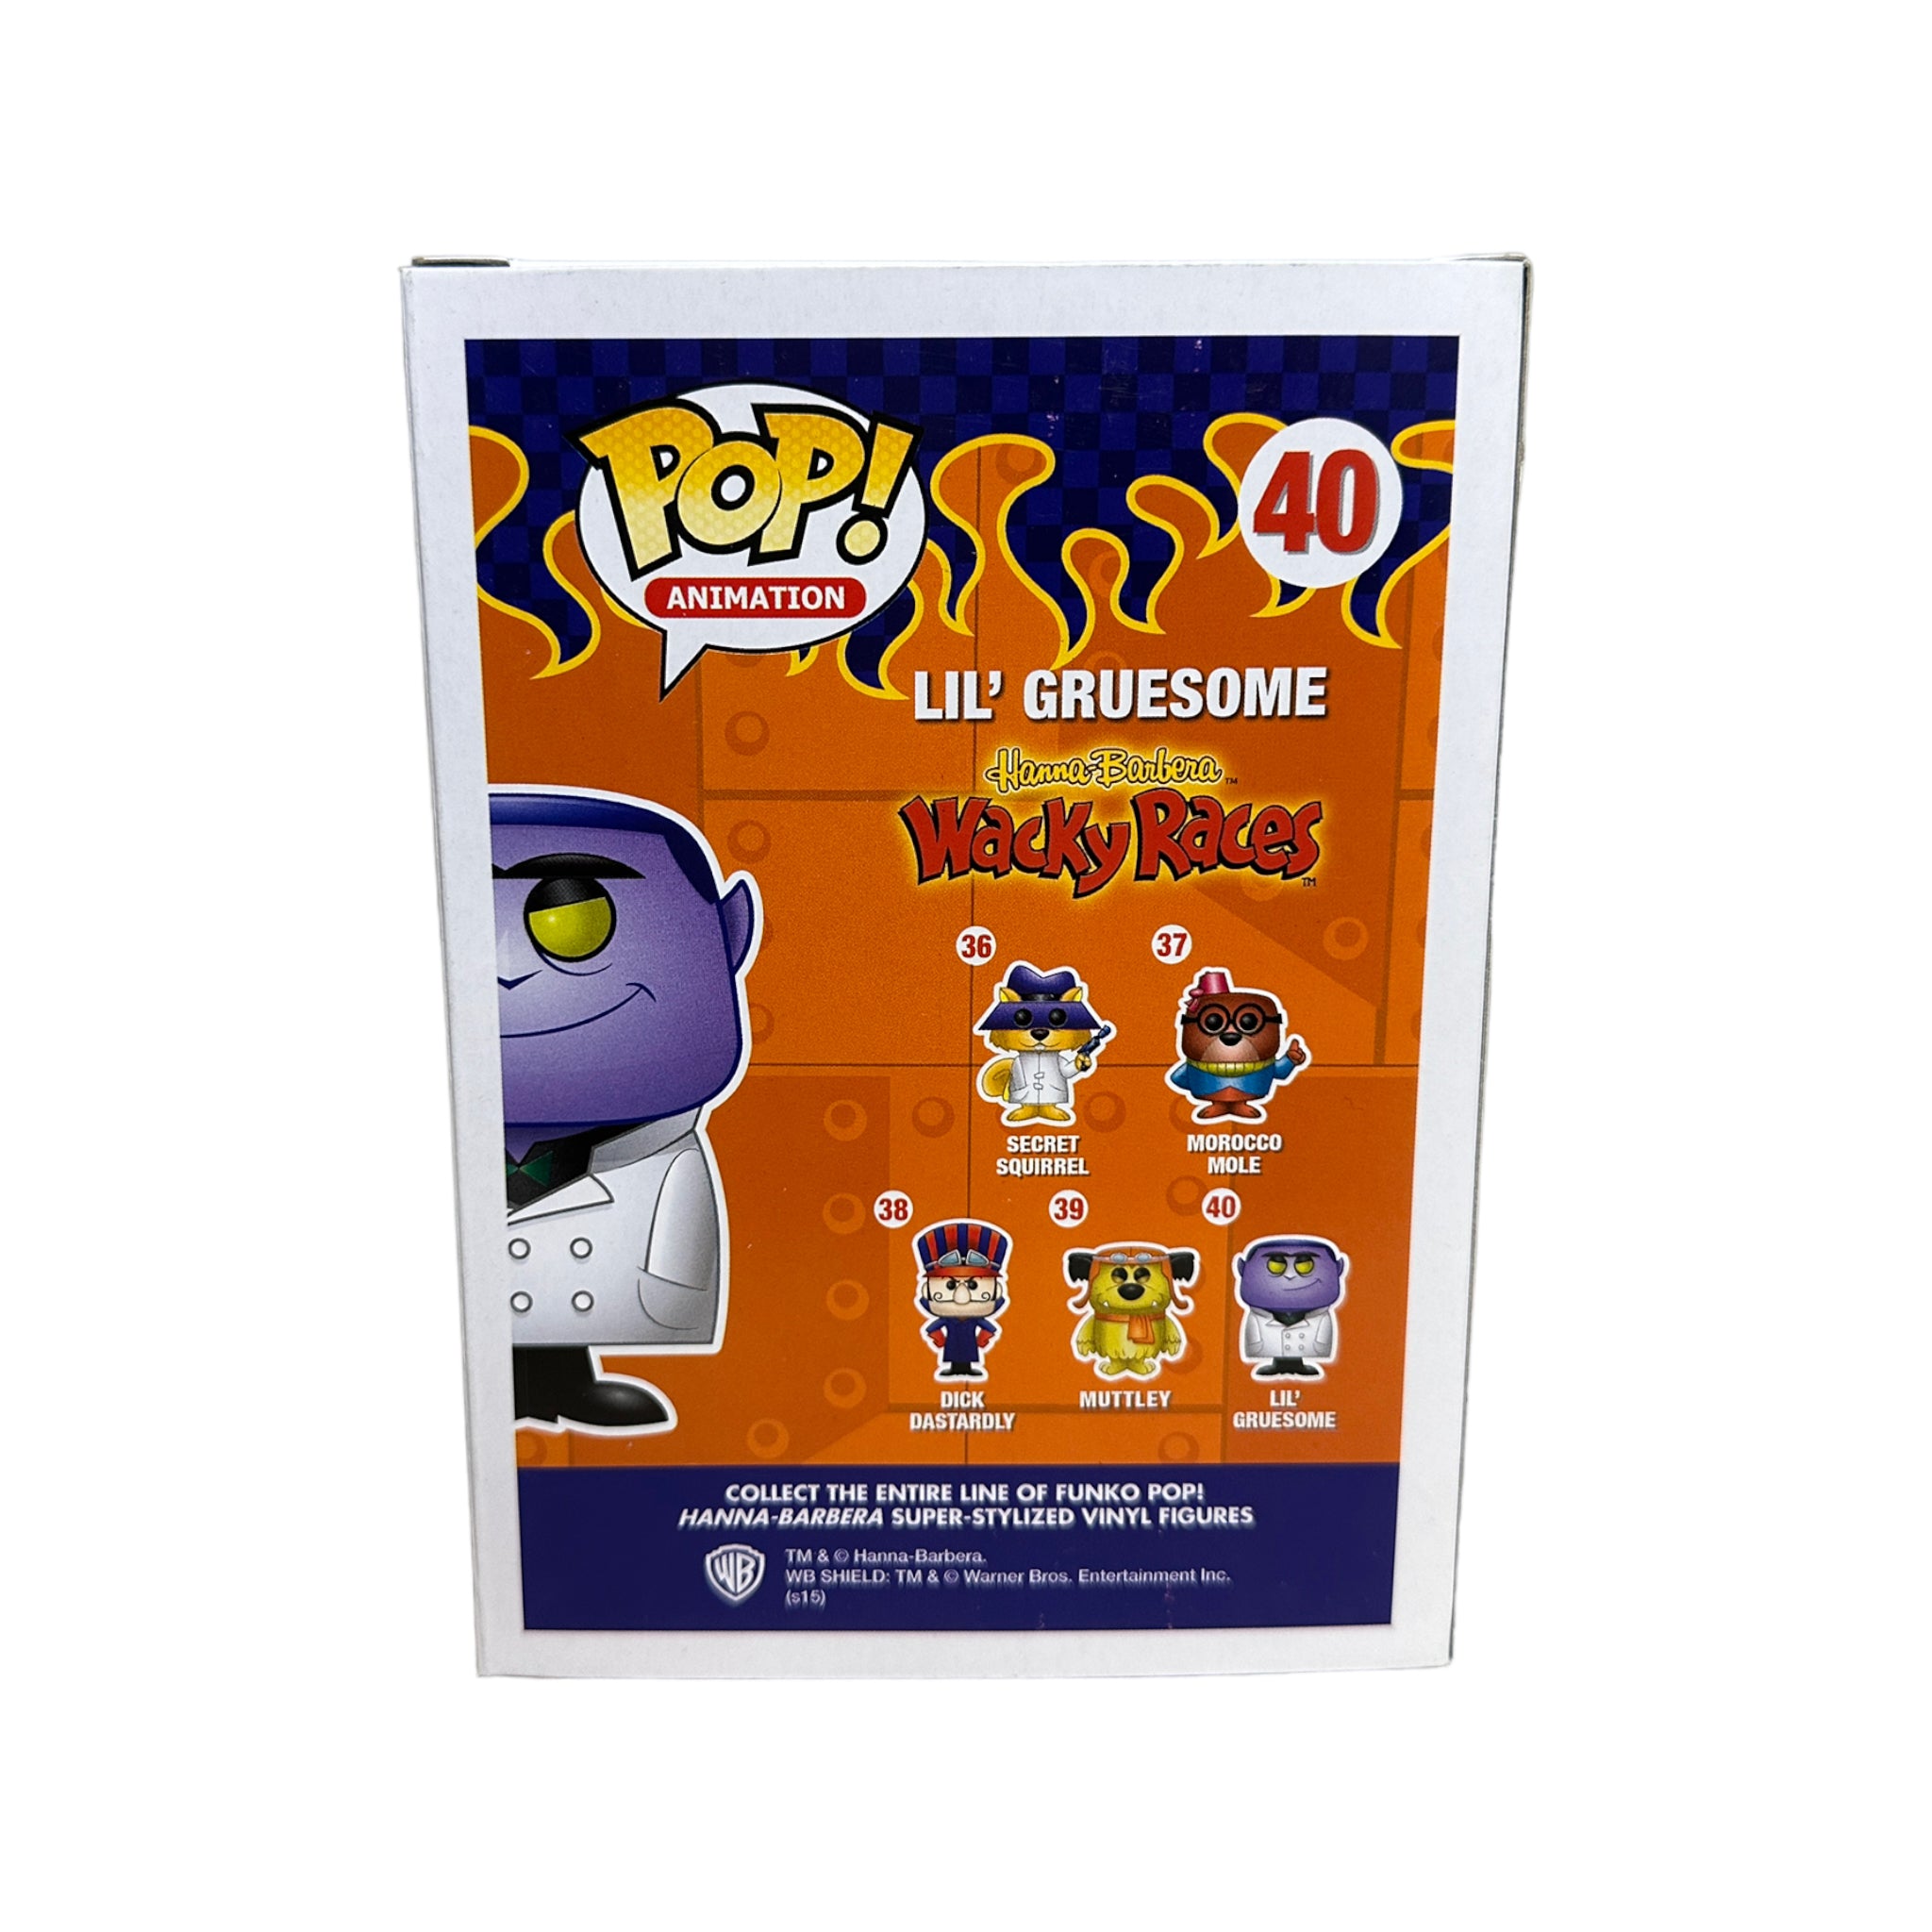 Lil' Gruesome #40 (Yellow) Funko Pop! - Wacky Races - SDCC 2015 Exclusive LE500 Pcs - Condition 8.5/10